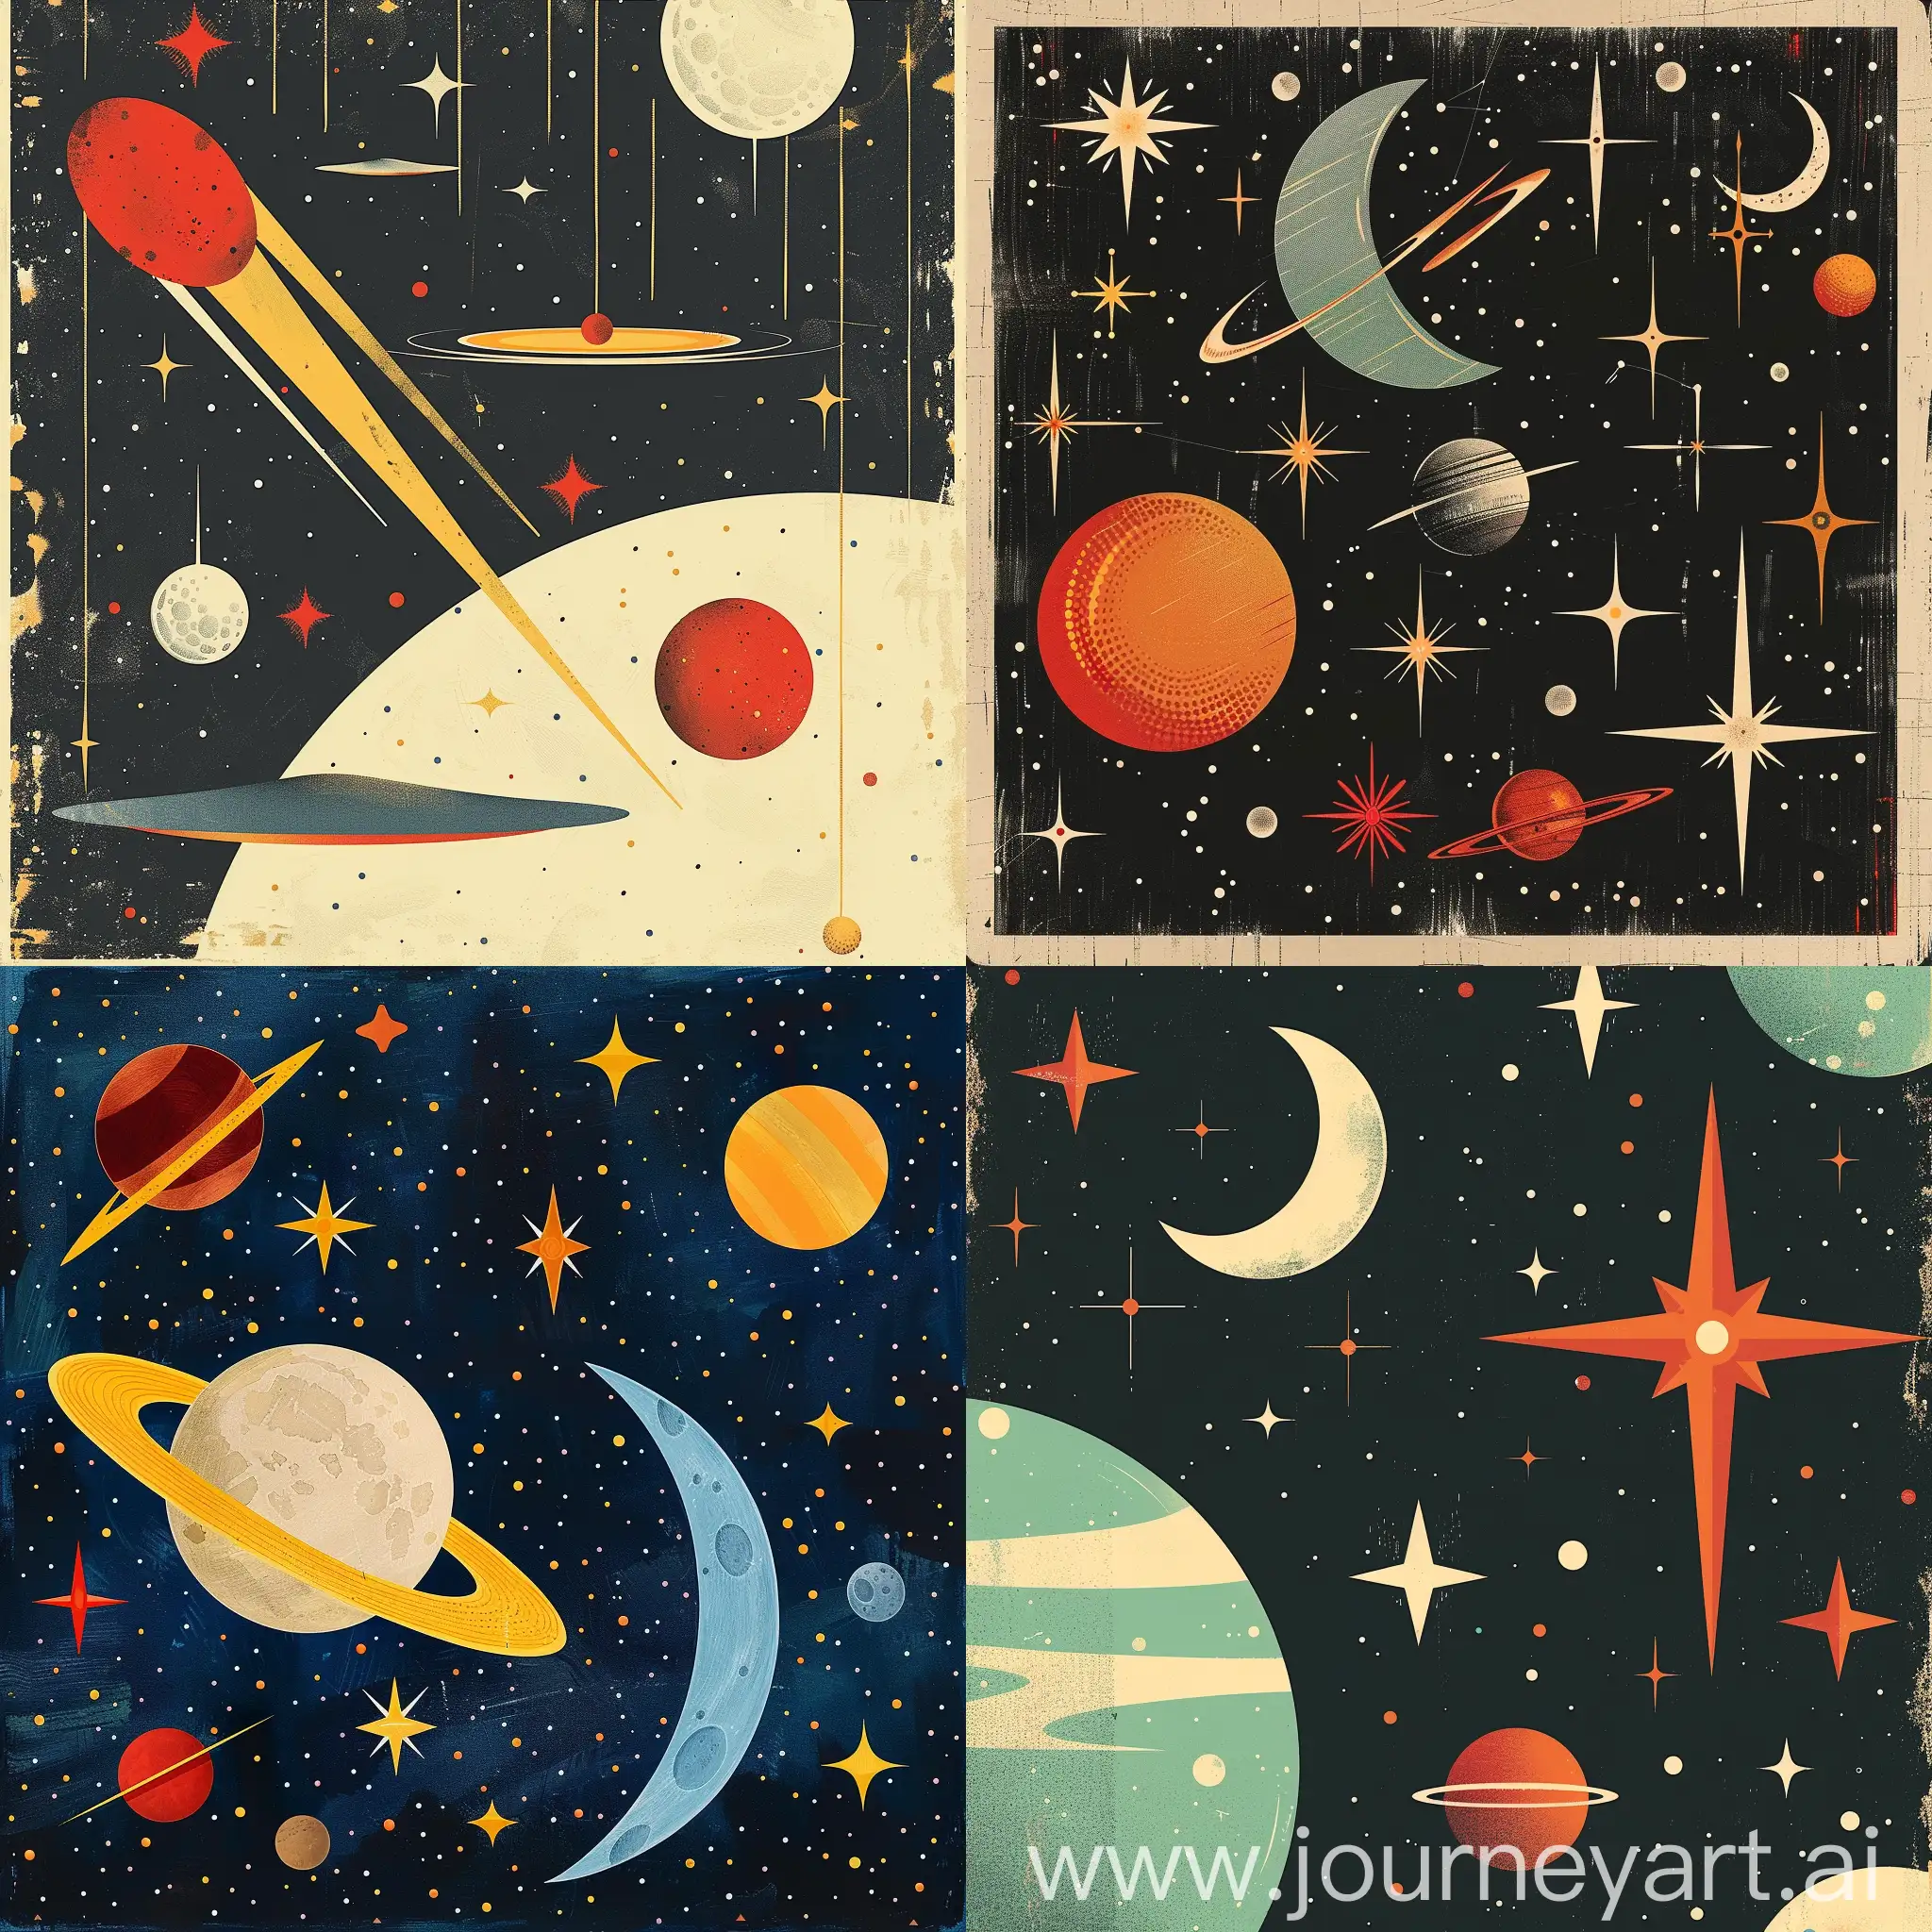 create an illustration of space including moon, stars and planets ,Josh Agle's Mid-century Modern style.